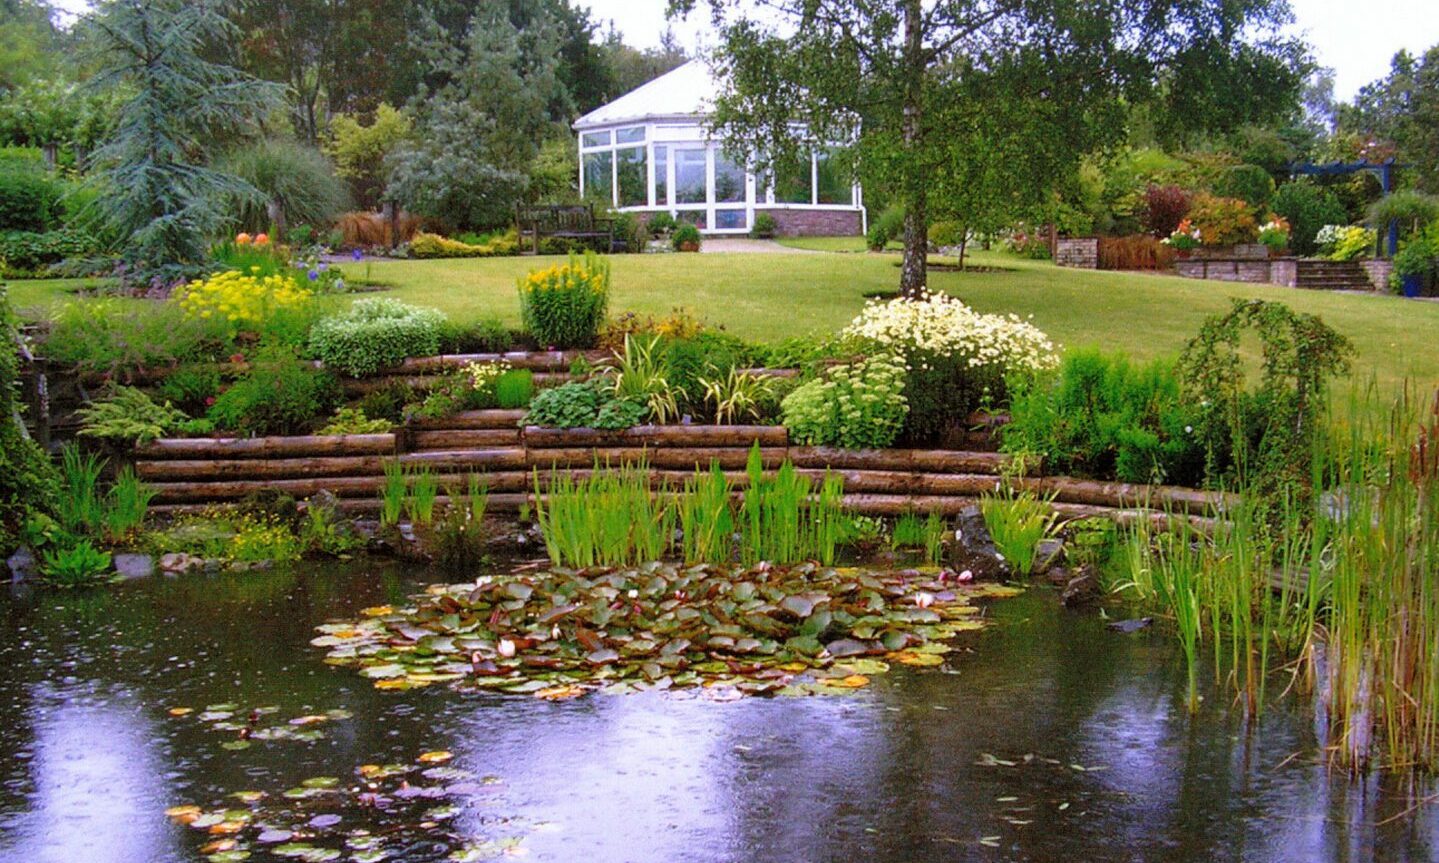 The main pond at Beechgrove and the conservatory.